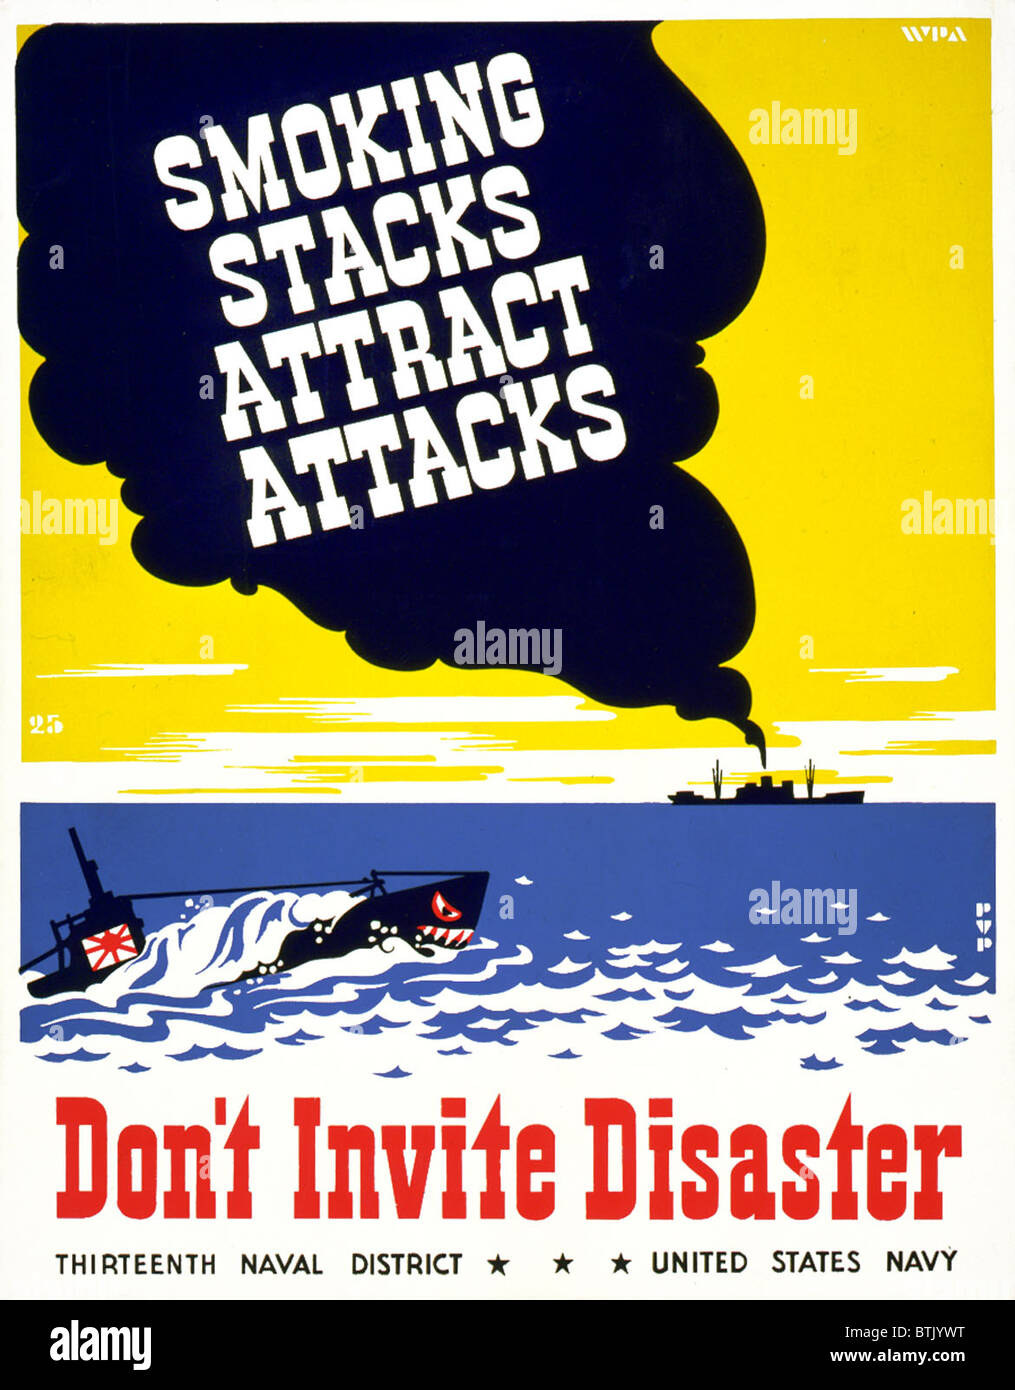 World War II, Poster for Thirteenth Naval District, United States Navy, showing smoke coming from smokestack of ship, Japanese submarine in foreground, poster reads: 'Smoking stacks attract attacks Don't invite disaster', poster circa 1941-1943. Stock Photo